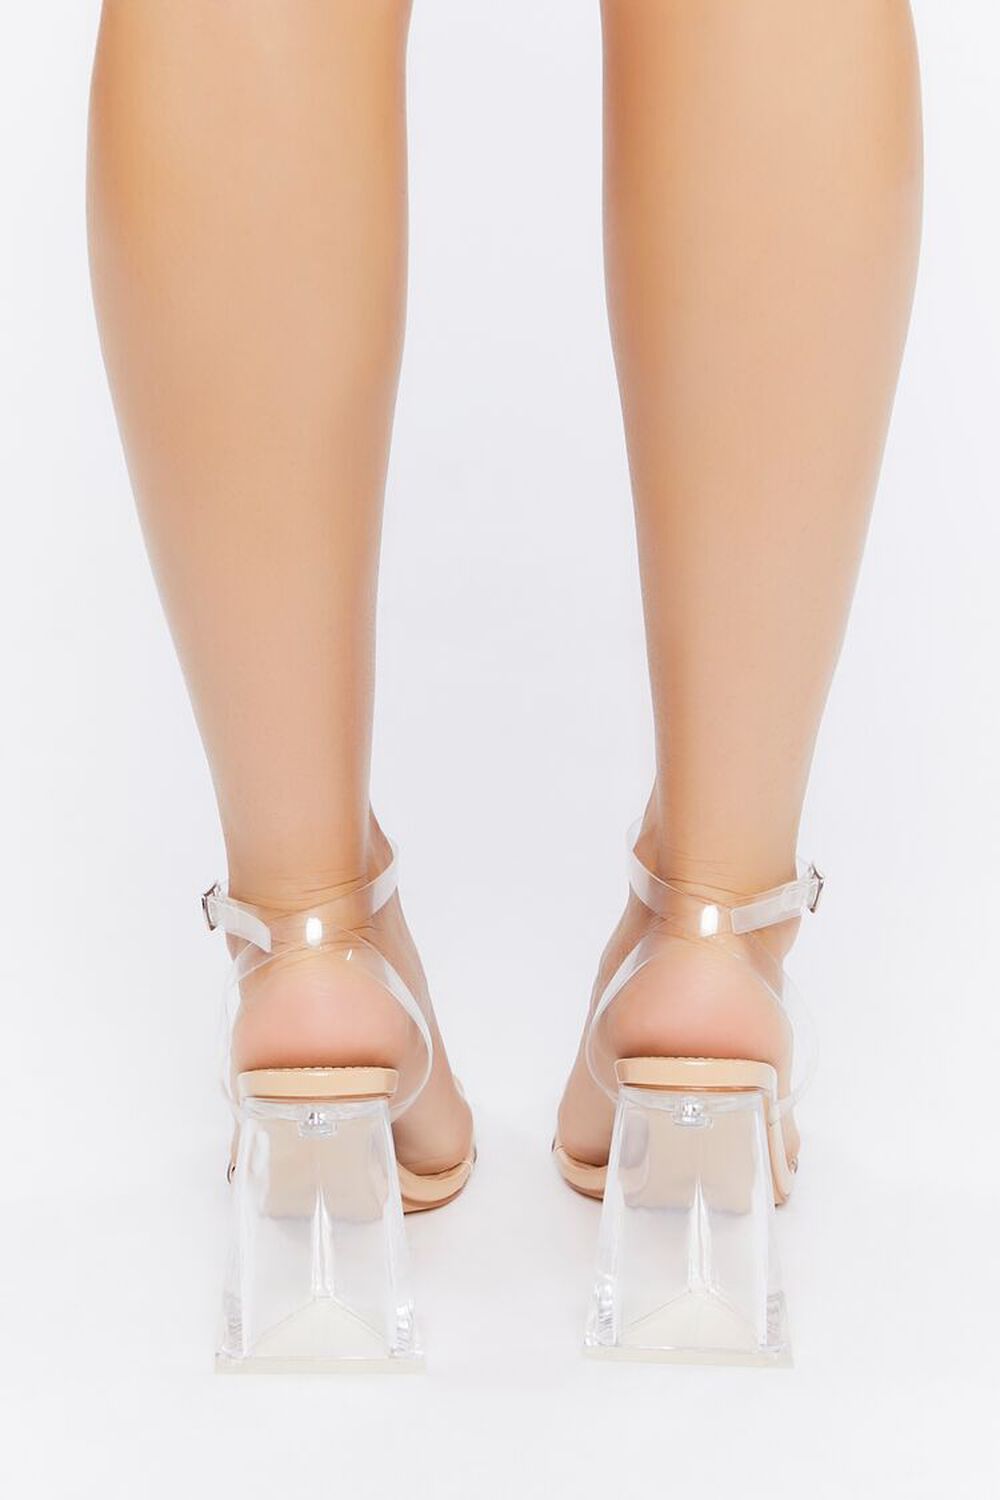 NUDE/CLEAR Clear Vinyl Flare Heels, image 3